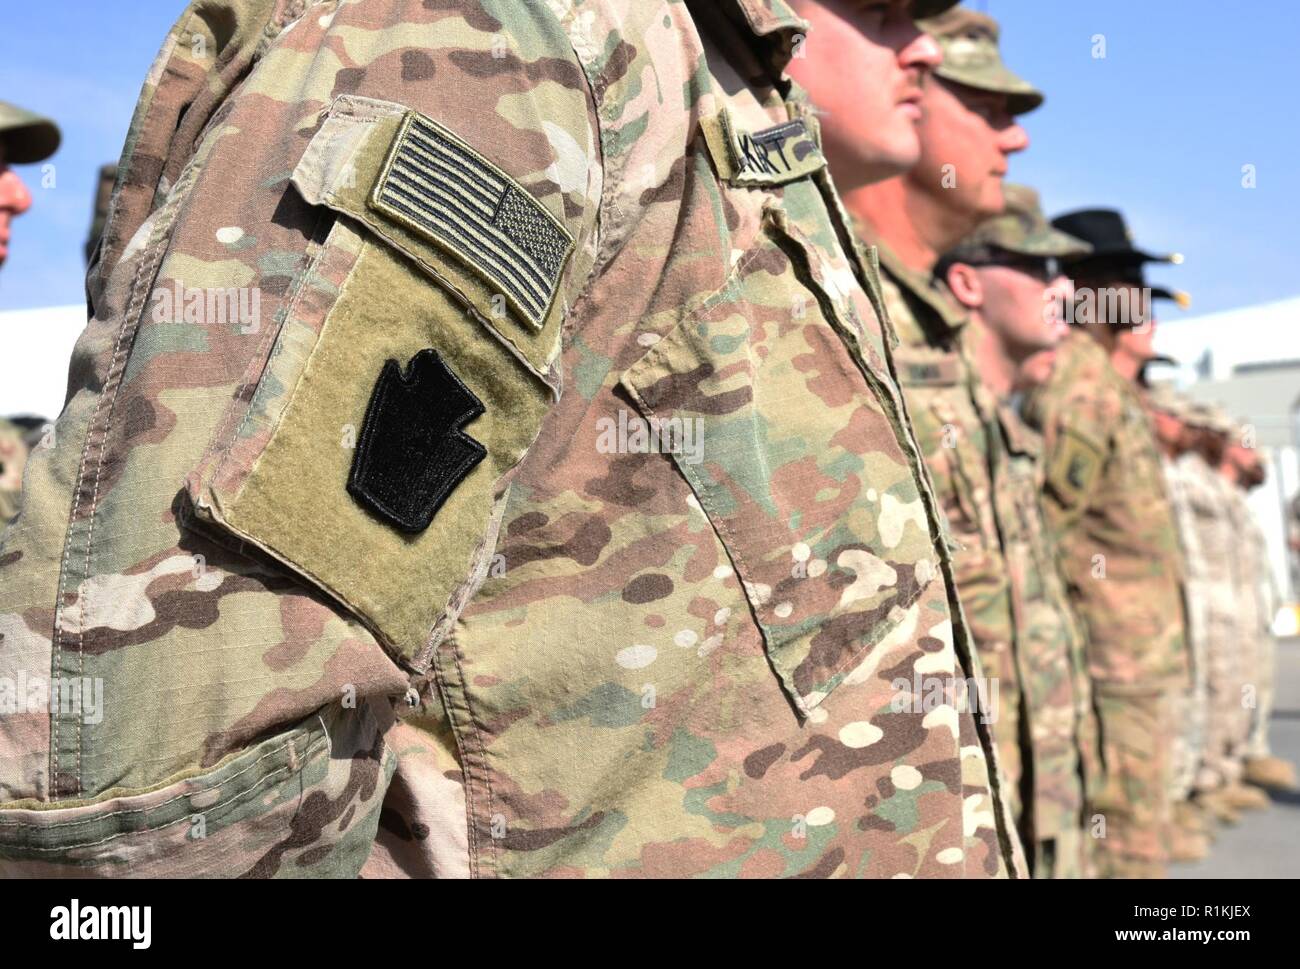 Task Force Spartan Soldiers assigned to 28th Infantry Division participated in a ceremony to officially open the new Jordan Armed Forces Joint Training Center, October 10, 2018, in Amman, Jordan. Stock Photo